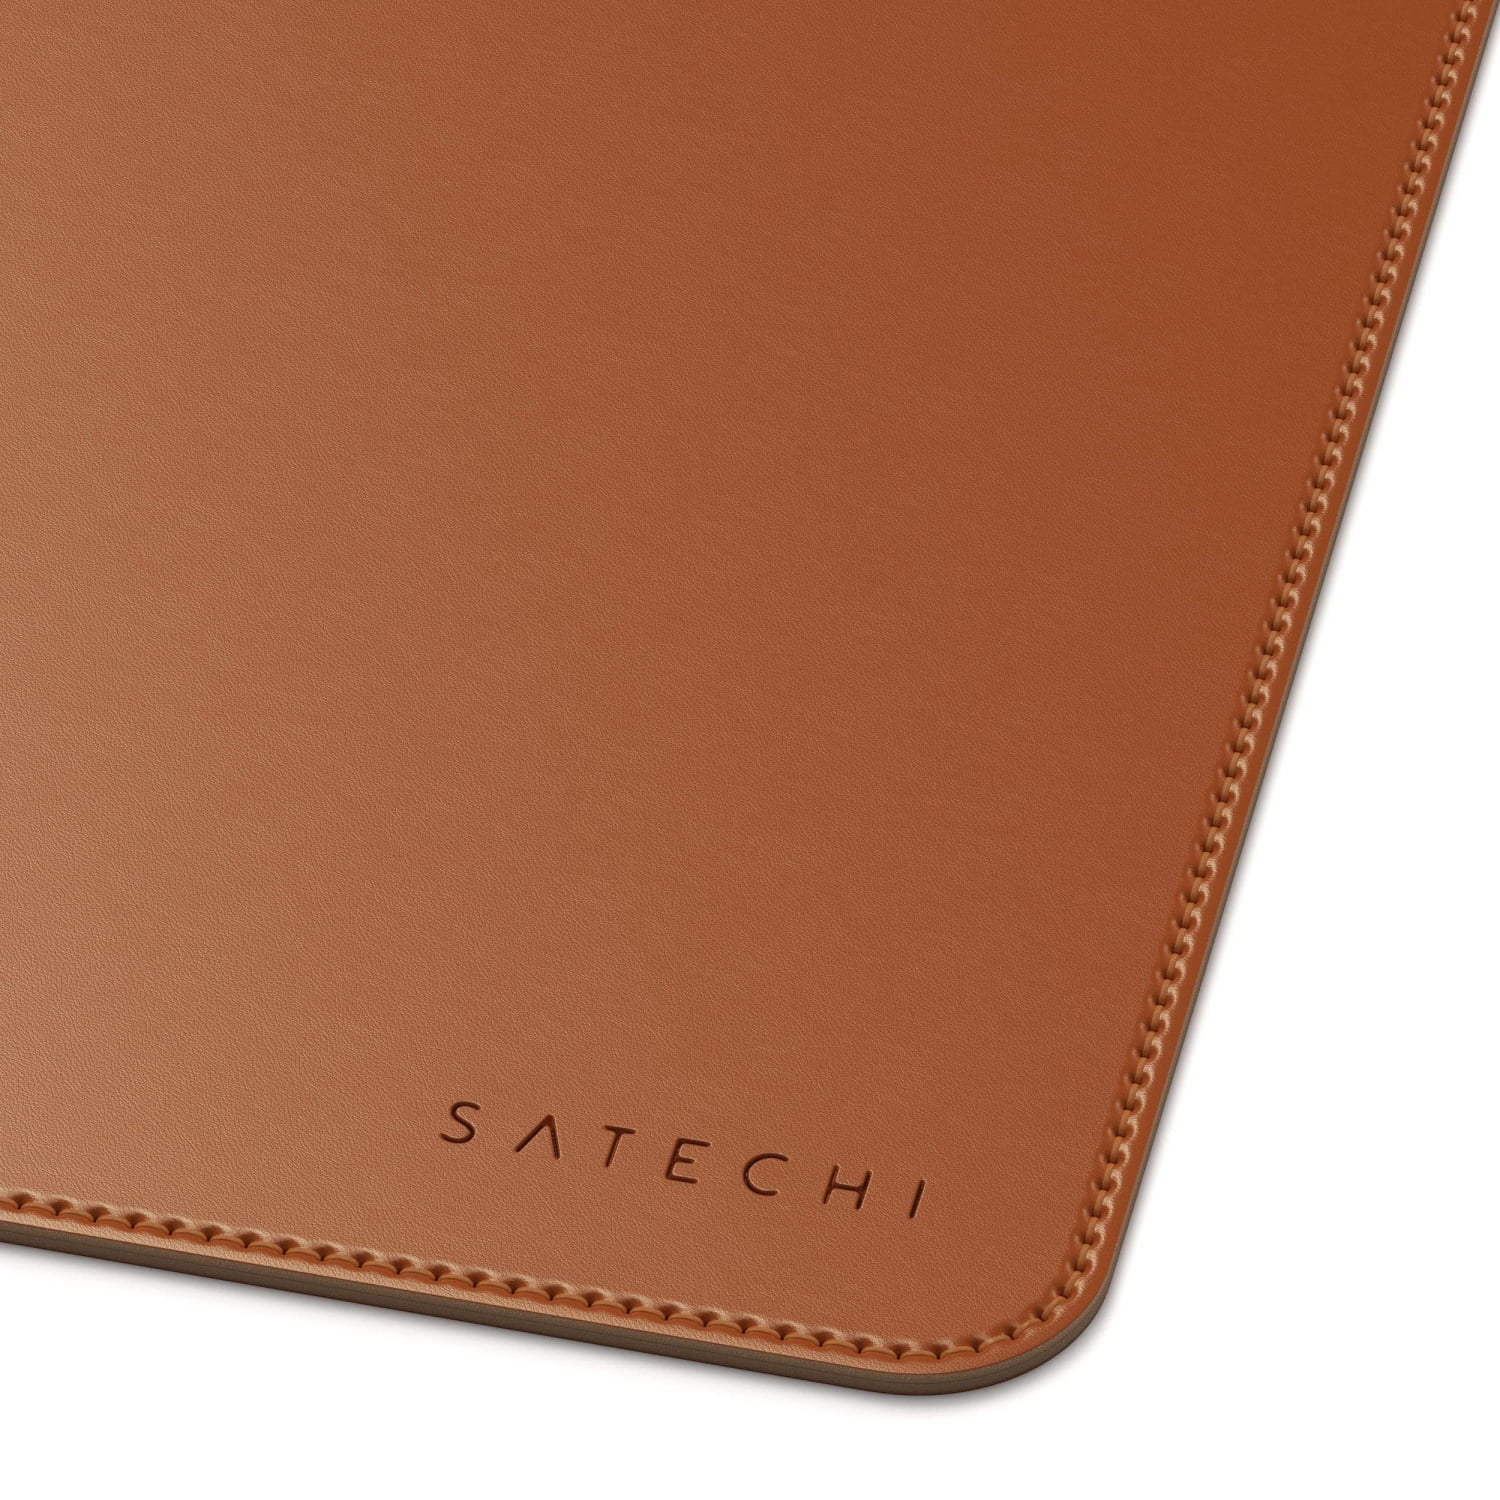 eco-leather-deskmate-other-satechi-902661.jpg